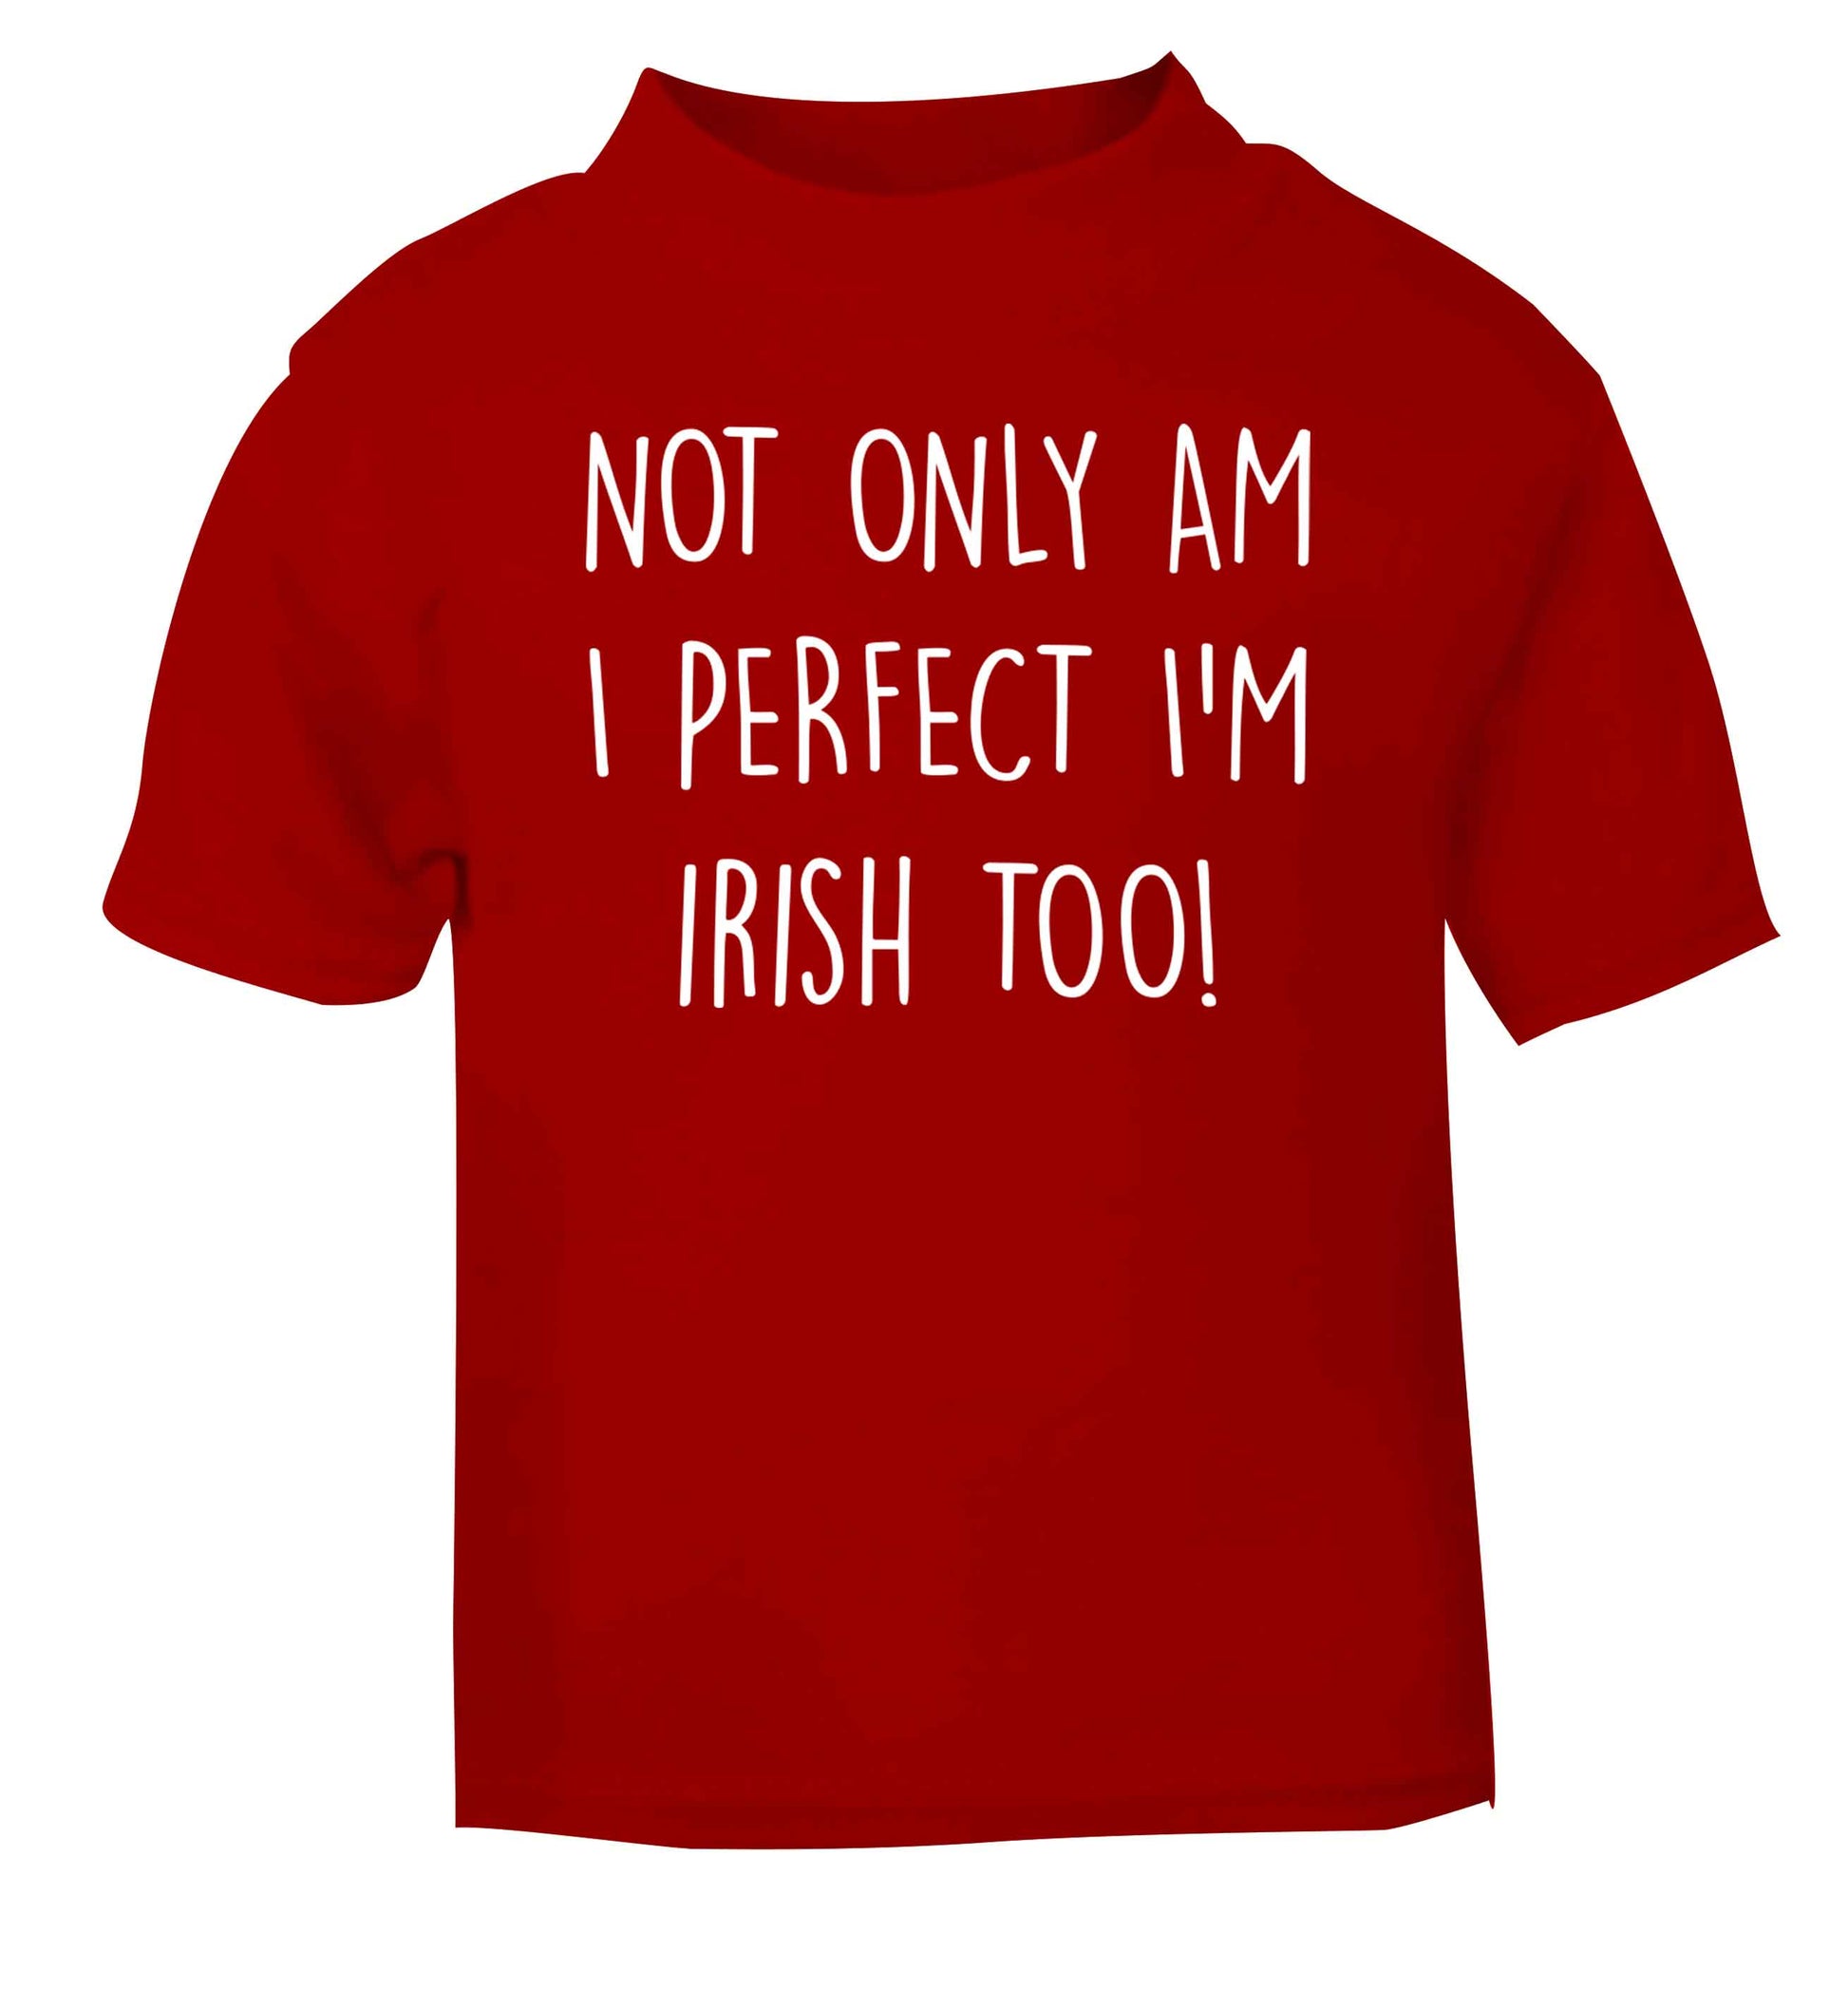 Not only am I perfect I'm Irish too! red baby toddler Tshirt 2 Years